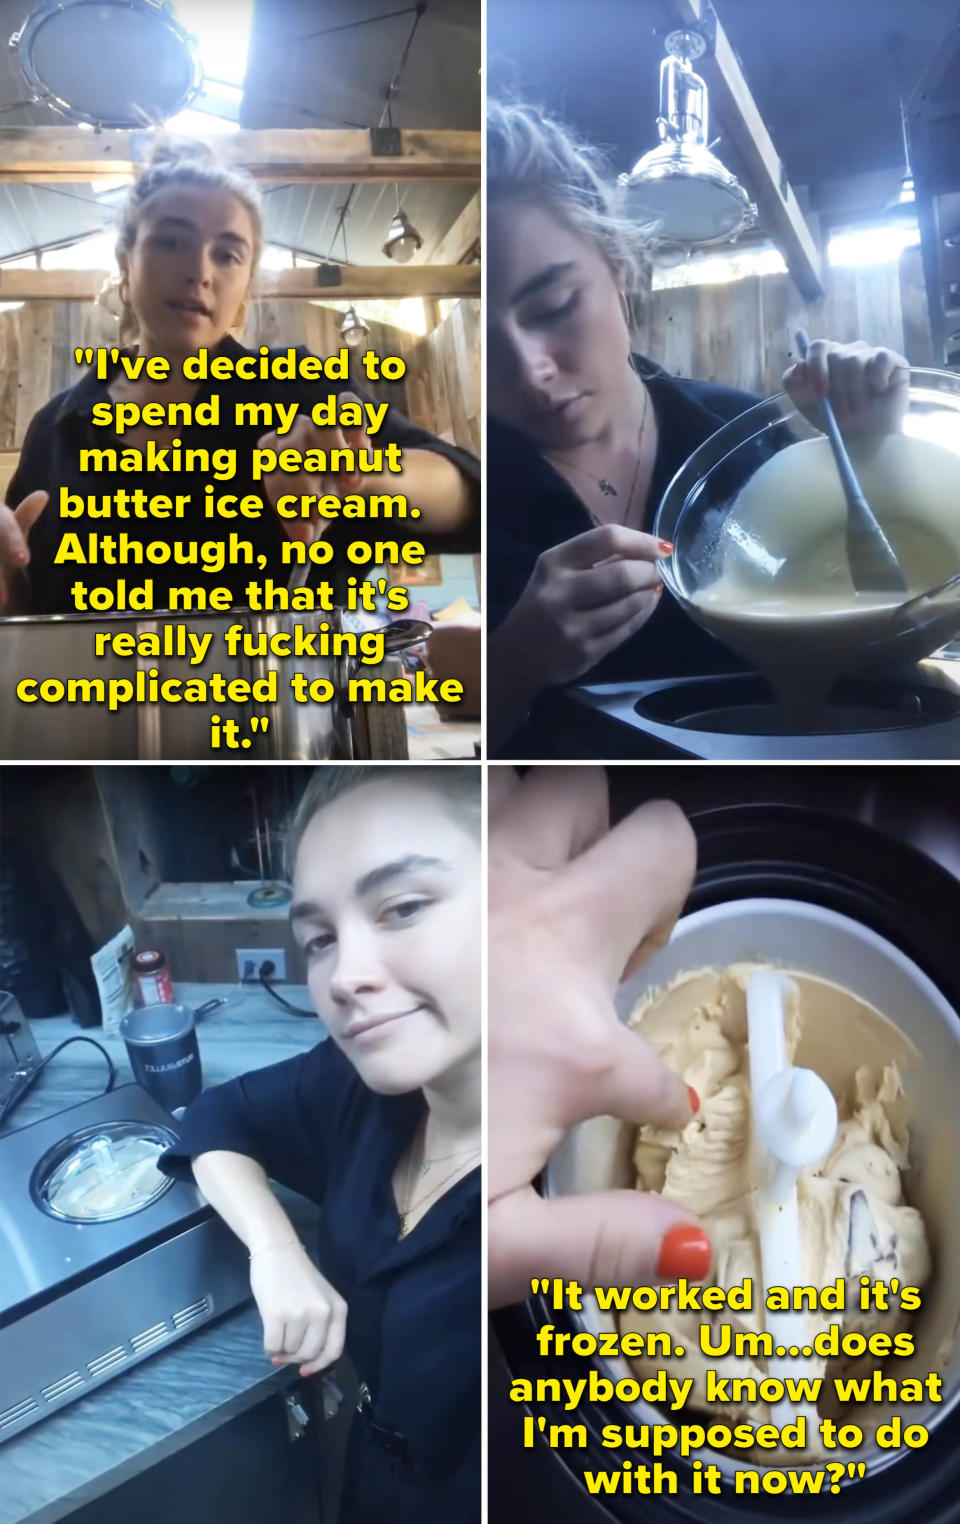 Florence explaining she's making peanut butter ice cream, but "it's really fucking complicated to make"